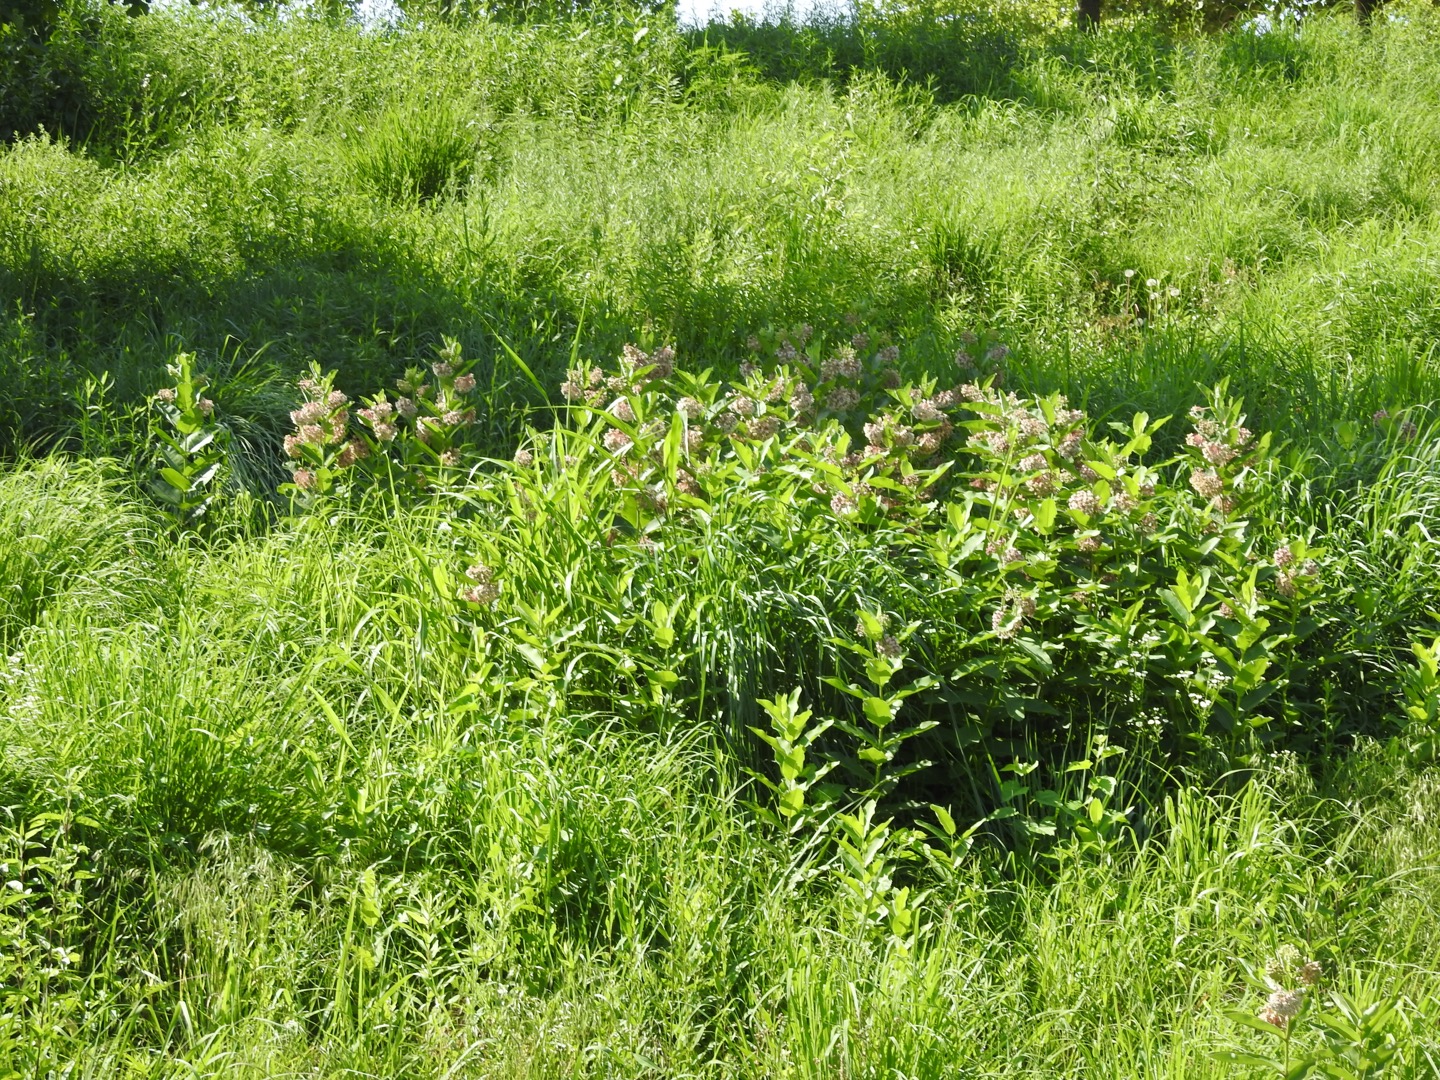 A far-away shot showing several pink-blooming milkweed plants growing in a clump close together. Other green plants surround the clump.